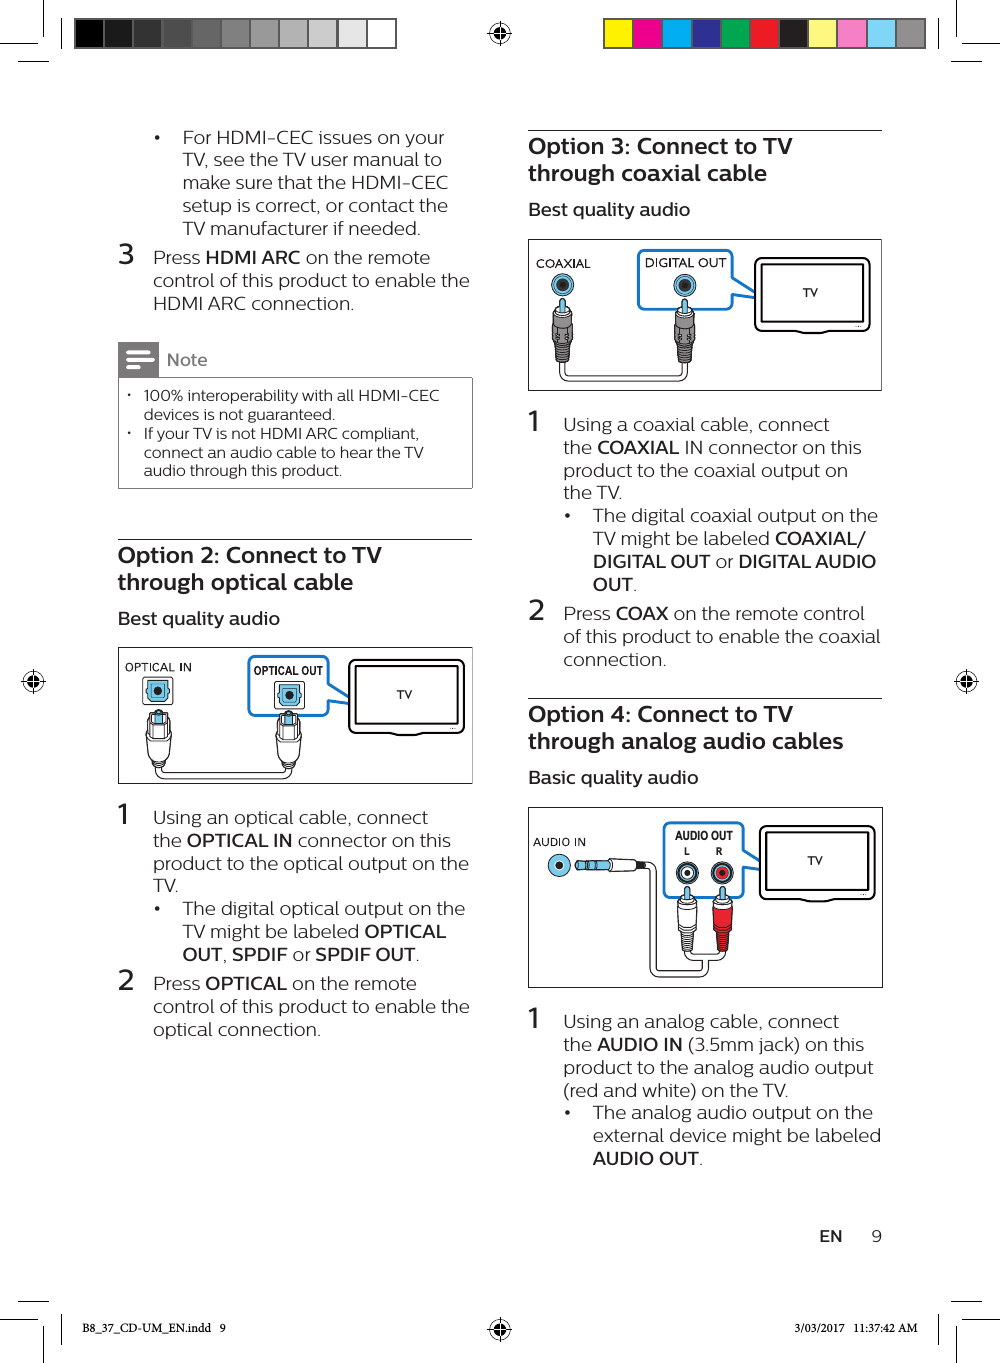 9EN•  For HDMI-CEC issues on your TV, see the TV user manual to make sure that the HDMI-CEC setup is correct, or contact the TV manufacturer if needed.3  Press HDMI ARC on the remote control of this product to enable the HDMI ARC connection.Note • 100% interoperability with all HDMI-CEC devices is not guaranteed. • If your TV is not HDMI ARC compliant, connect an audio cable to hear the TV audio through this product.Option 2: Connect to TV through optical cableBest quality audio TV  1  Using an optical cable, connect the OPTICAL IN connector on this product to the optical output on the TV. •  The digital optical output on the TV might be labeled OPTICAL OUT, SPDIF or SPDIF OUT. 2  Press OPTICAL on the remote control of this product to enable the optical connection.Option 3: Connect to TV through coaxial cableBest quality audio  1  Using a coaxial cable, connect the COAXIAL IN connector on this product to the coaxial output on the TV. •  The digital coaxial output on the TV might be labeled COAXIAL/DIGITAL OUT or DIGITAL AUDIO OUT. 2  Press COAX on the remote control of this product to enable the coaxial connection.Option 4: Connect to TV through analog audio cablesBasic quality audio AUDIO OUTRL TV  1  Using an analog cable, connect the AUDIO IN (3.5mm jack) on this product to the analog audio output (red and white) on the TV.•  The analog audio output on the external device might be labeled AUDIO OUT.TVB8_37_CD-UM_EN.indd   9 3/03/2017   11:37:42 AM